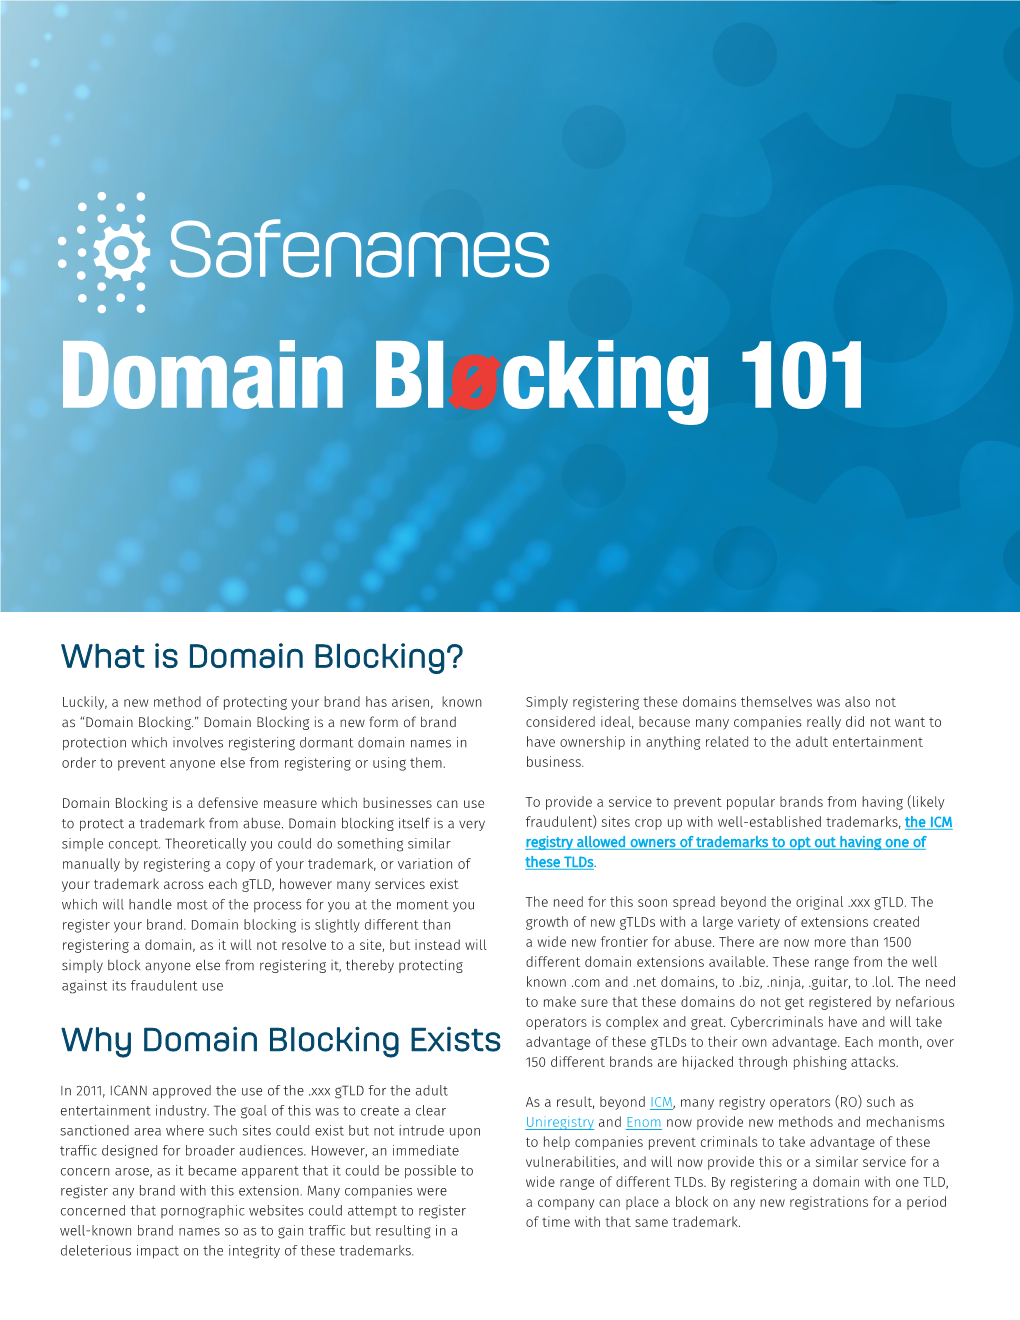 Why Domain Blocking Exists Advantage of These Gtlds to Their Own Advantage